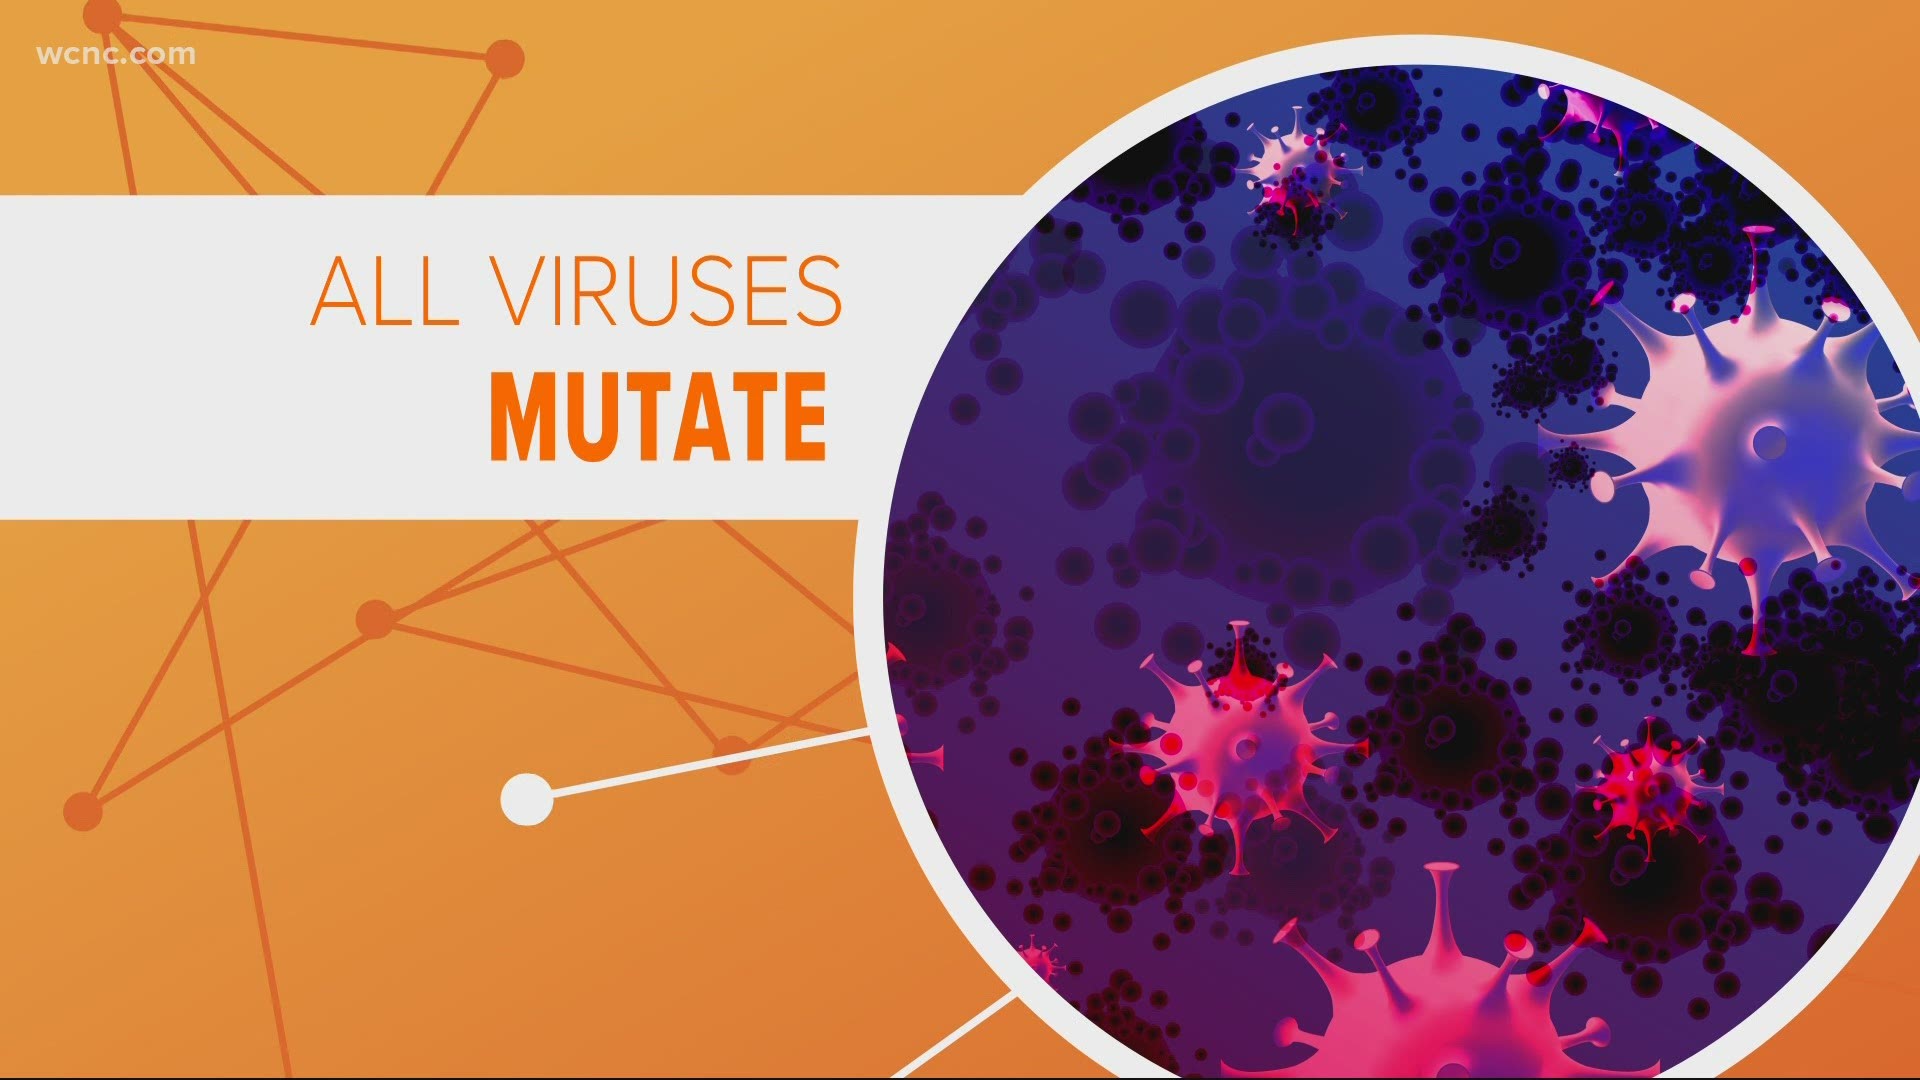 Scientists say it all comes down to mutations. All viruses change and adapt over time.